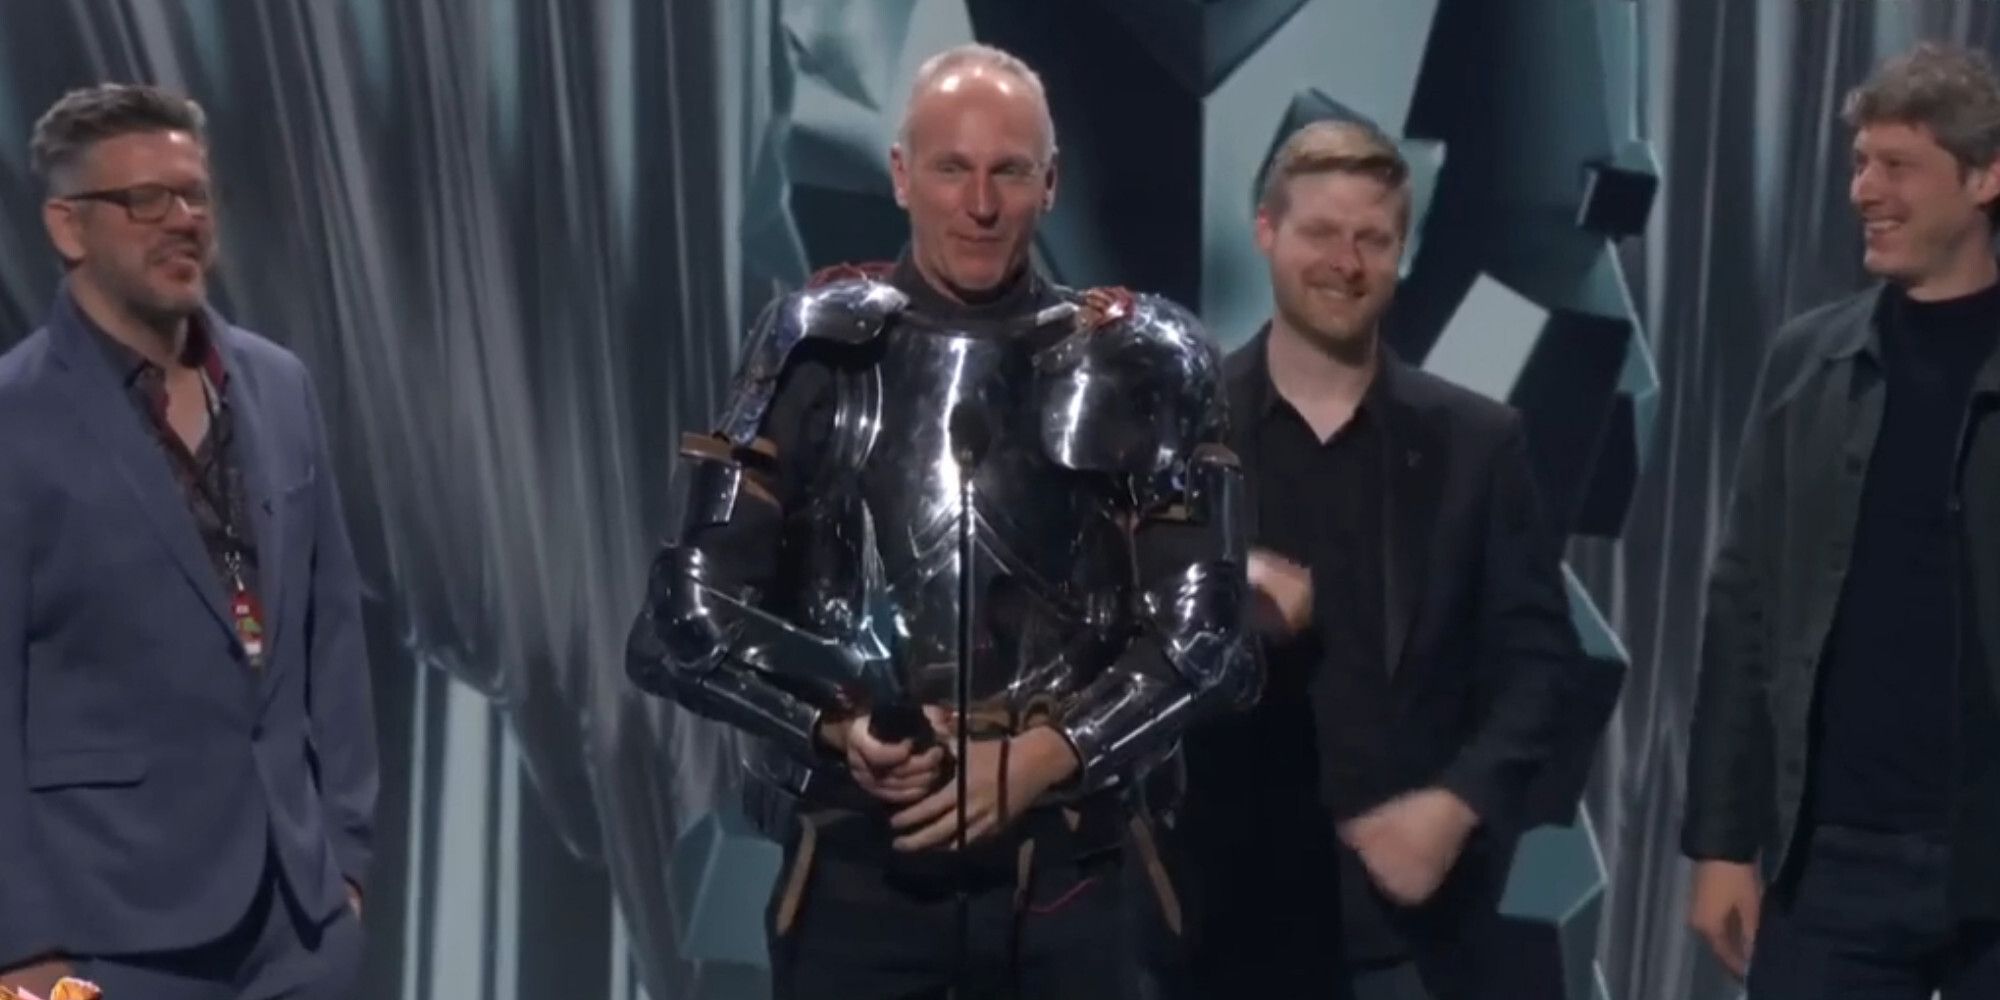 Geoff Keighley agrees that The Game Awards winners were played off too  quickly, but says no one was actually cut off